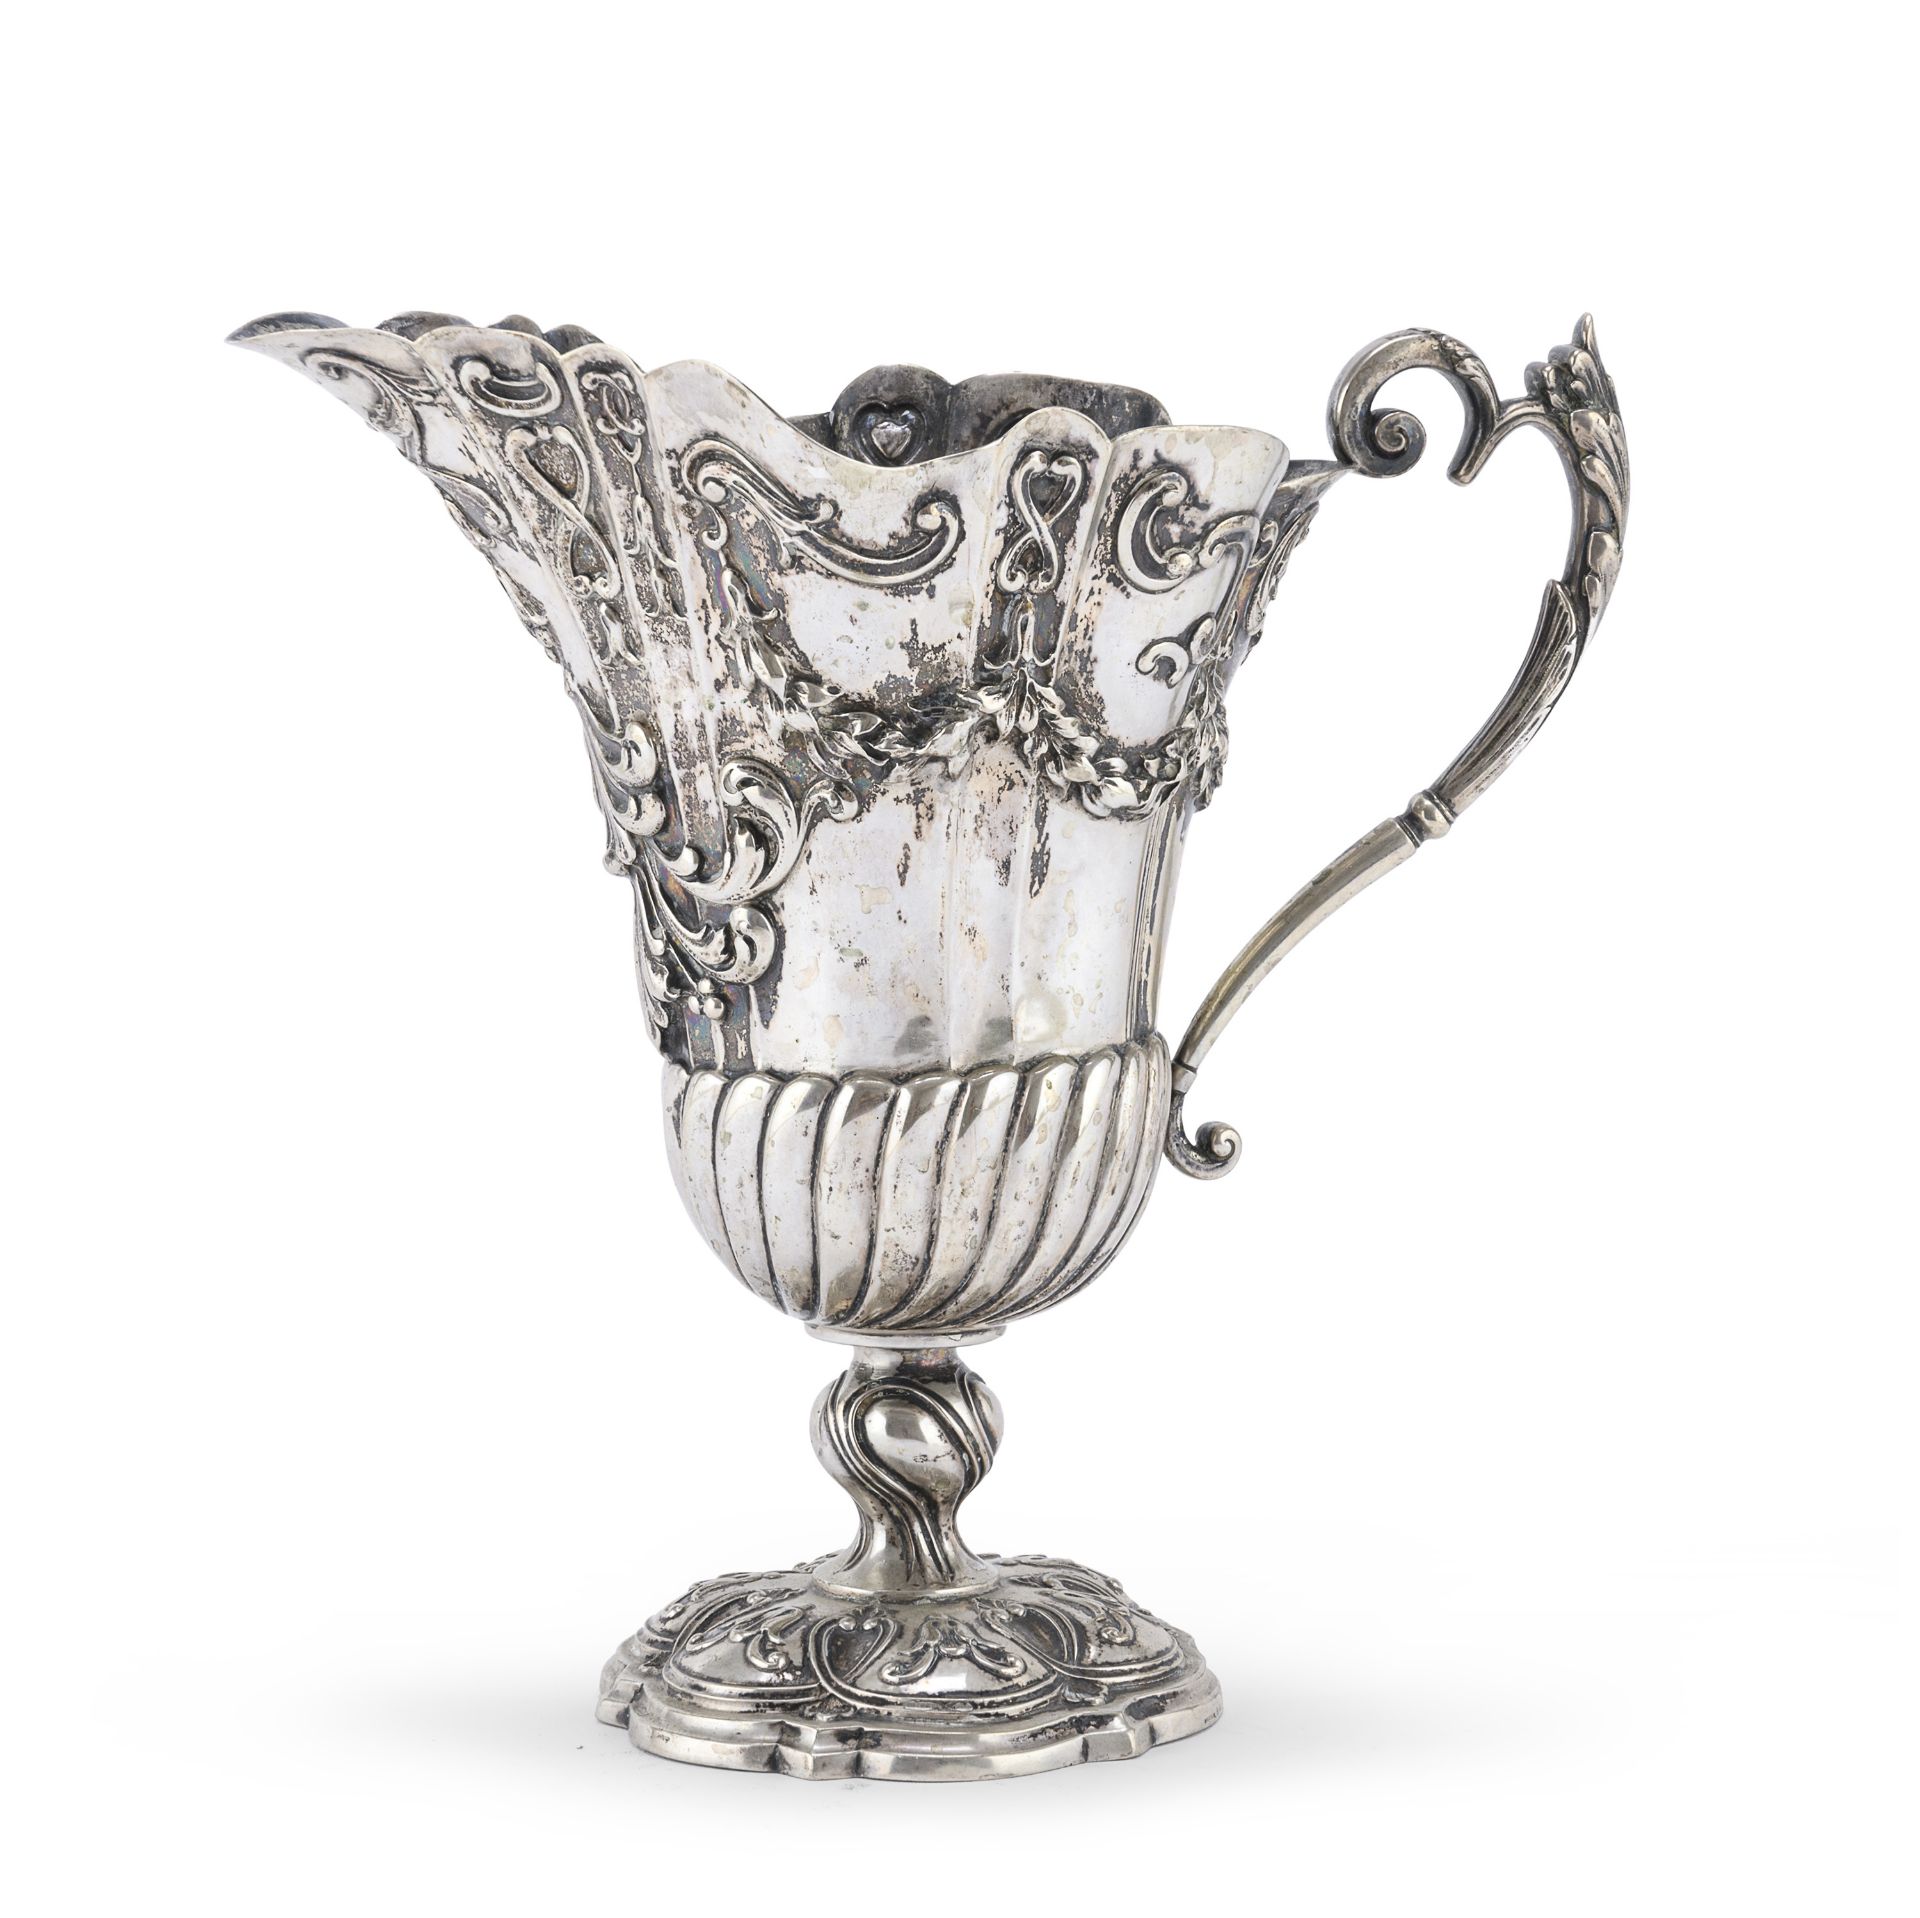 SILVER PITCHER ITALY 1930s